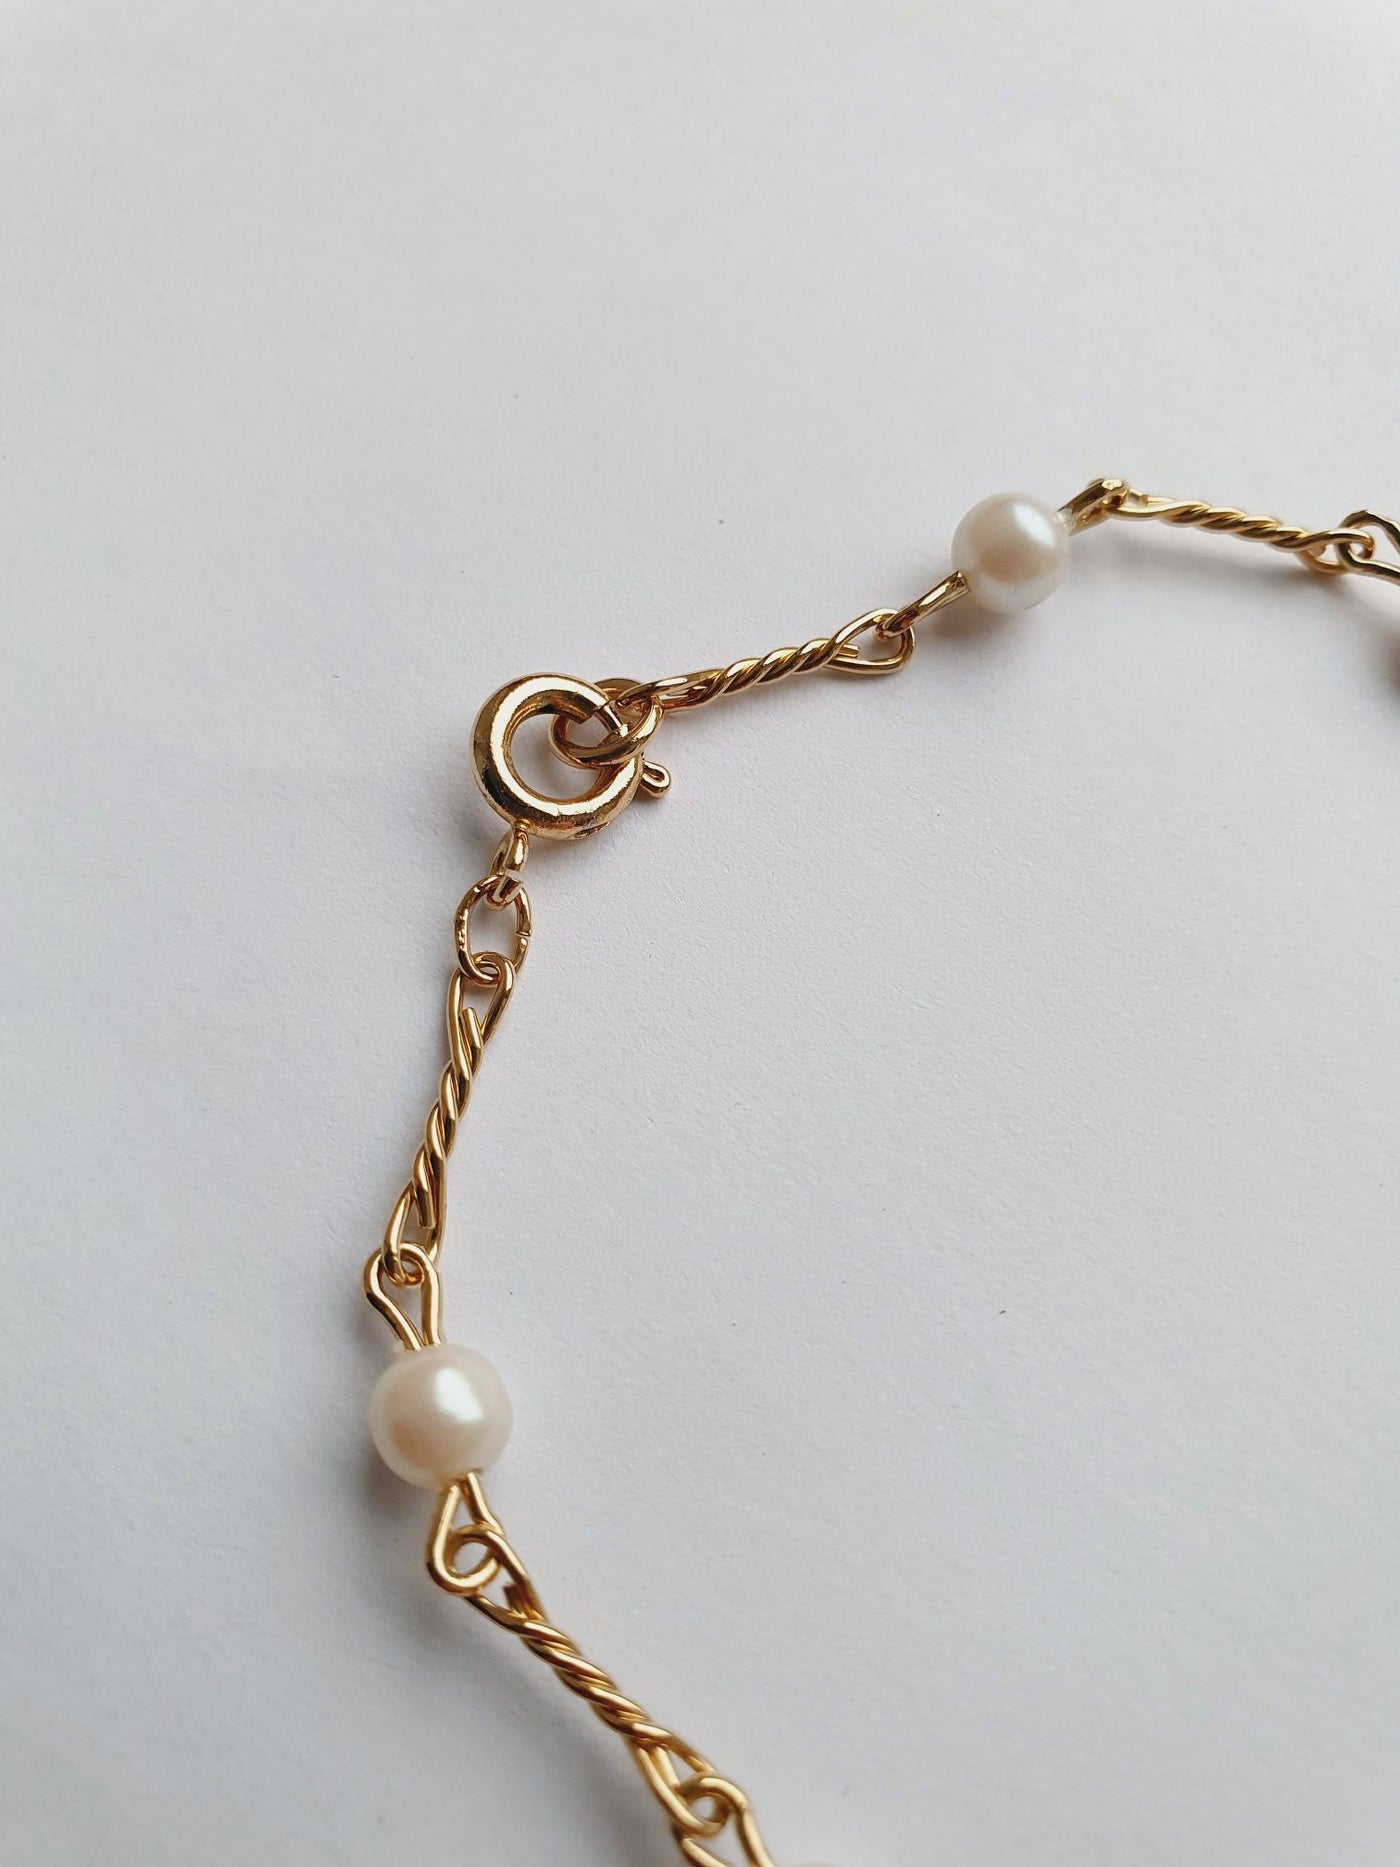 Vintage Gold Plated Twist Bar Chain Bracelet with Pearls